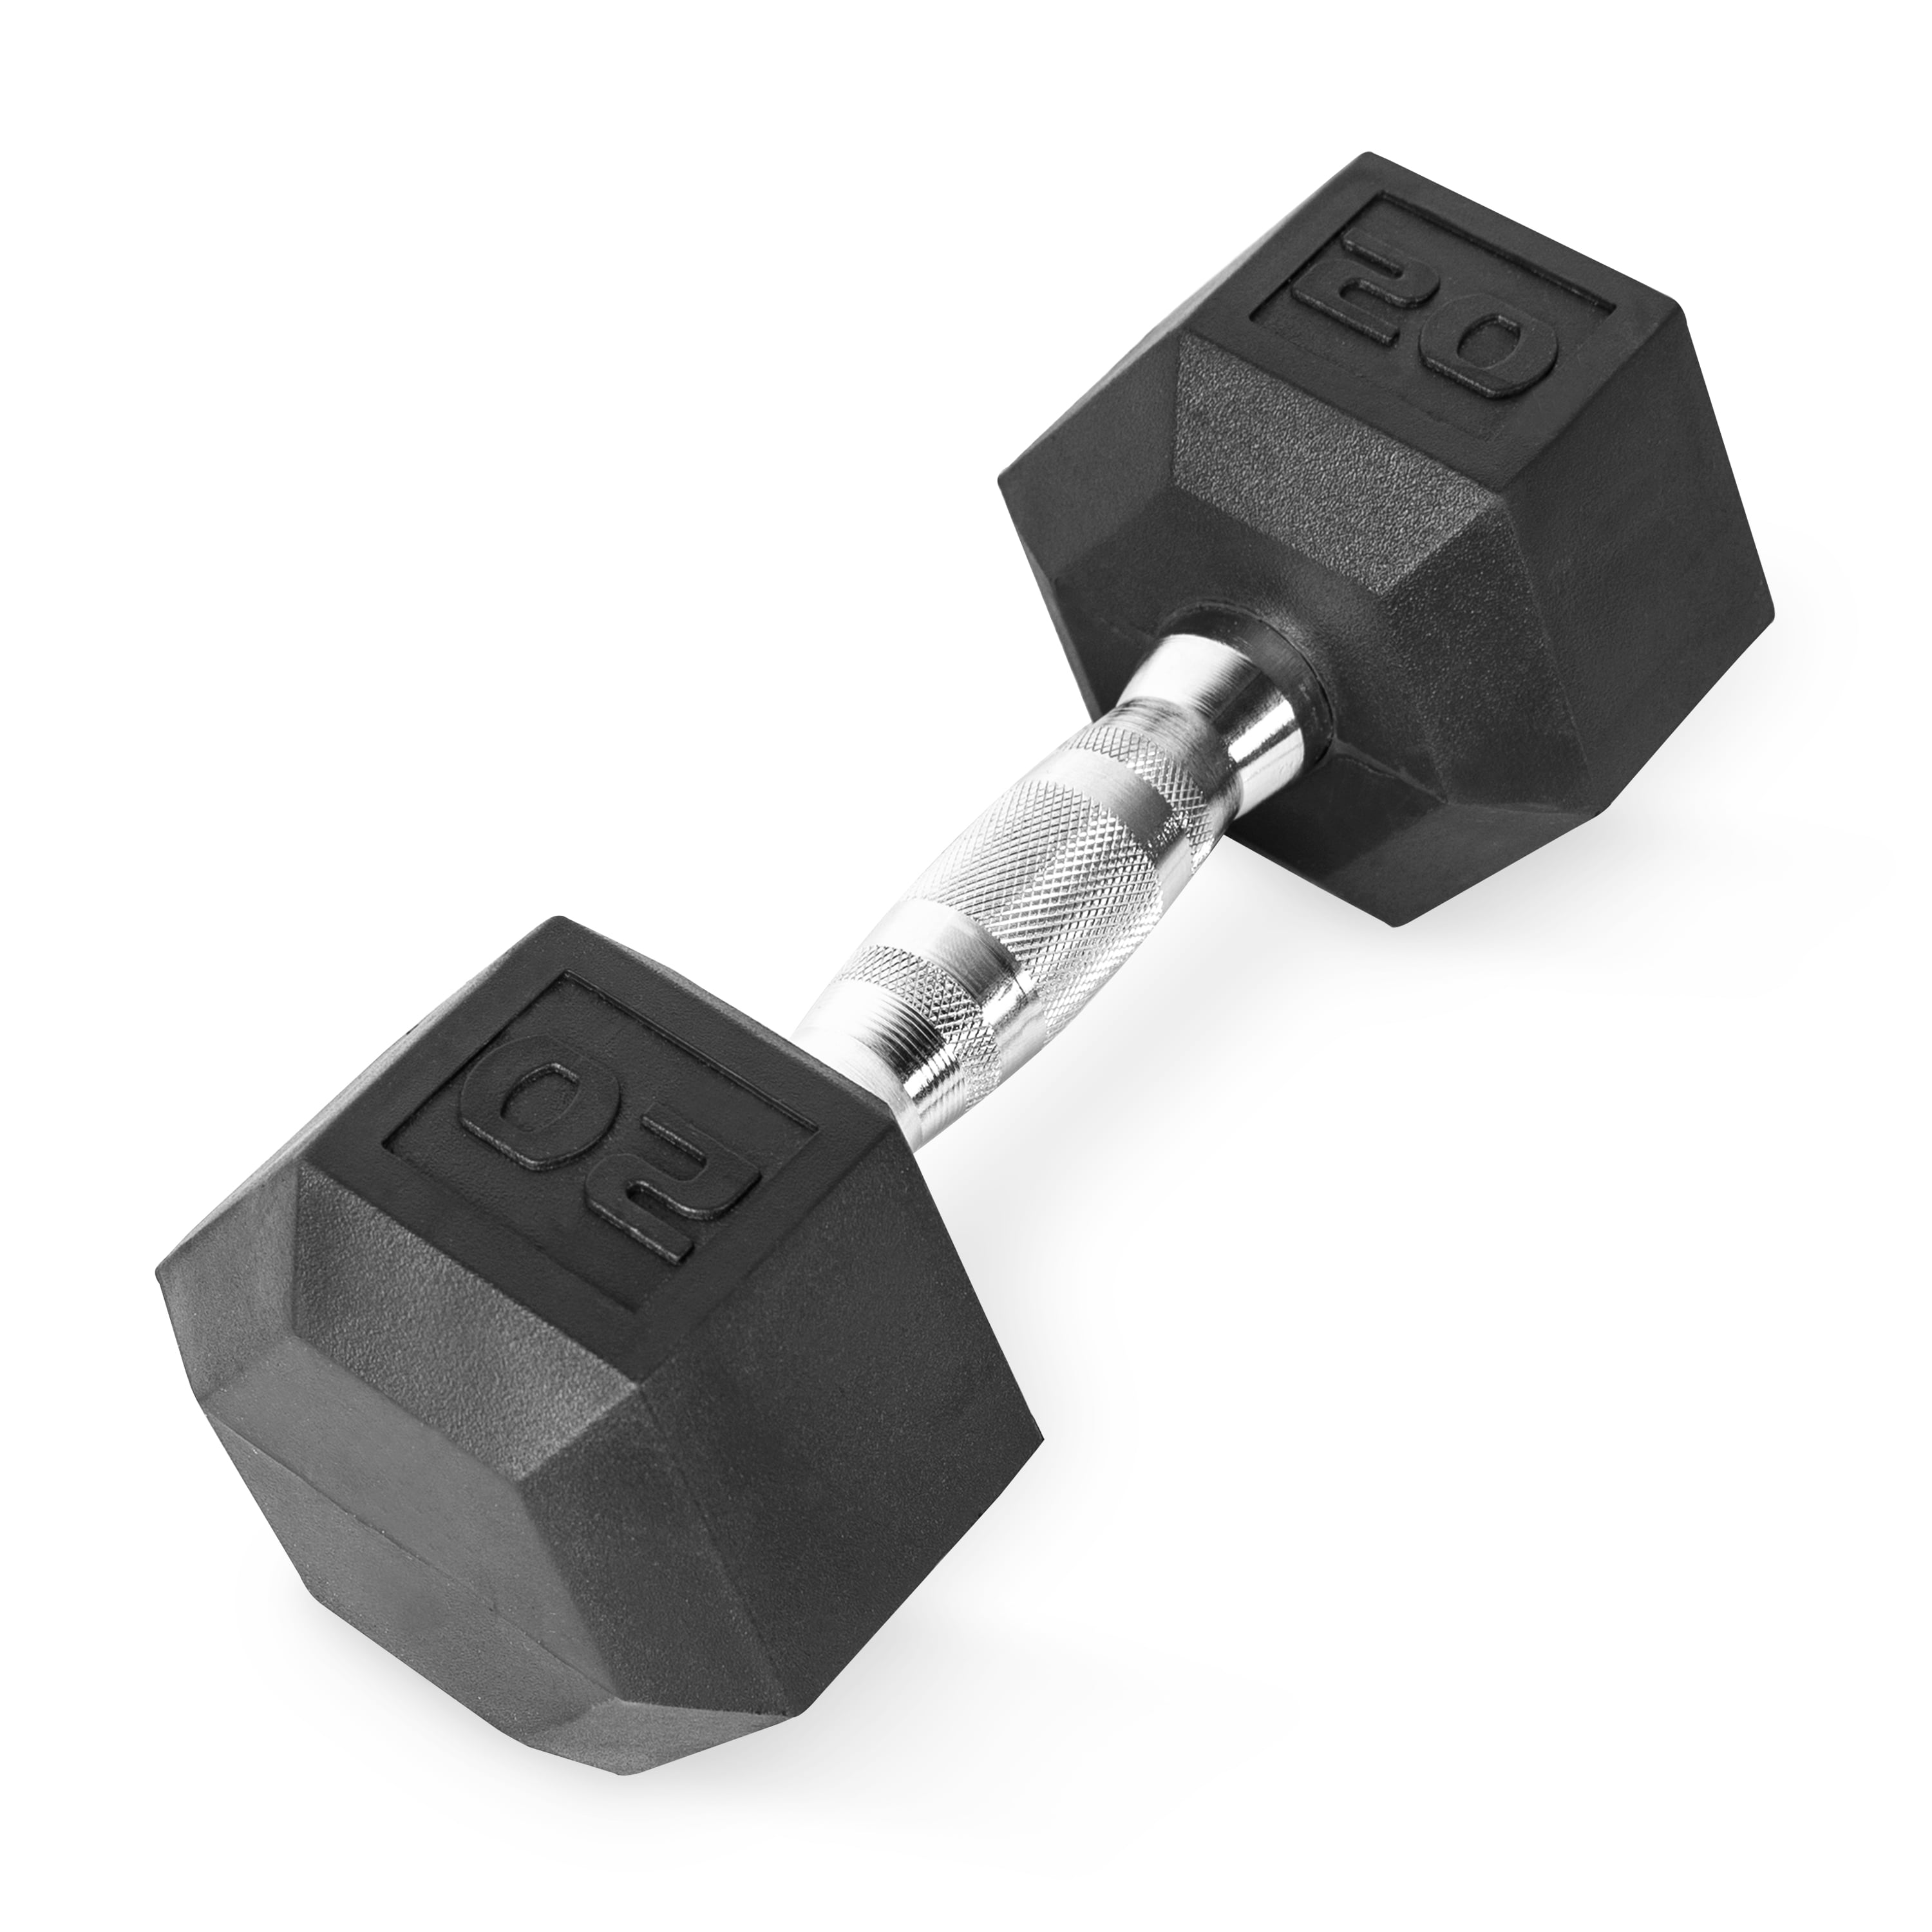 CAP Barbell Coated Hex Dumbbell Weights Single